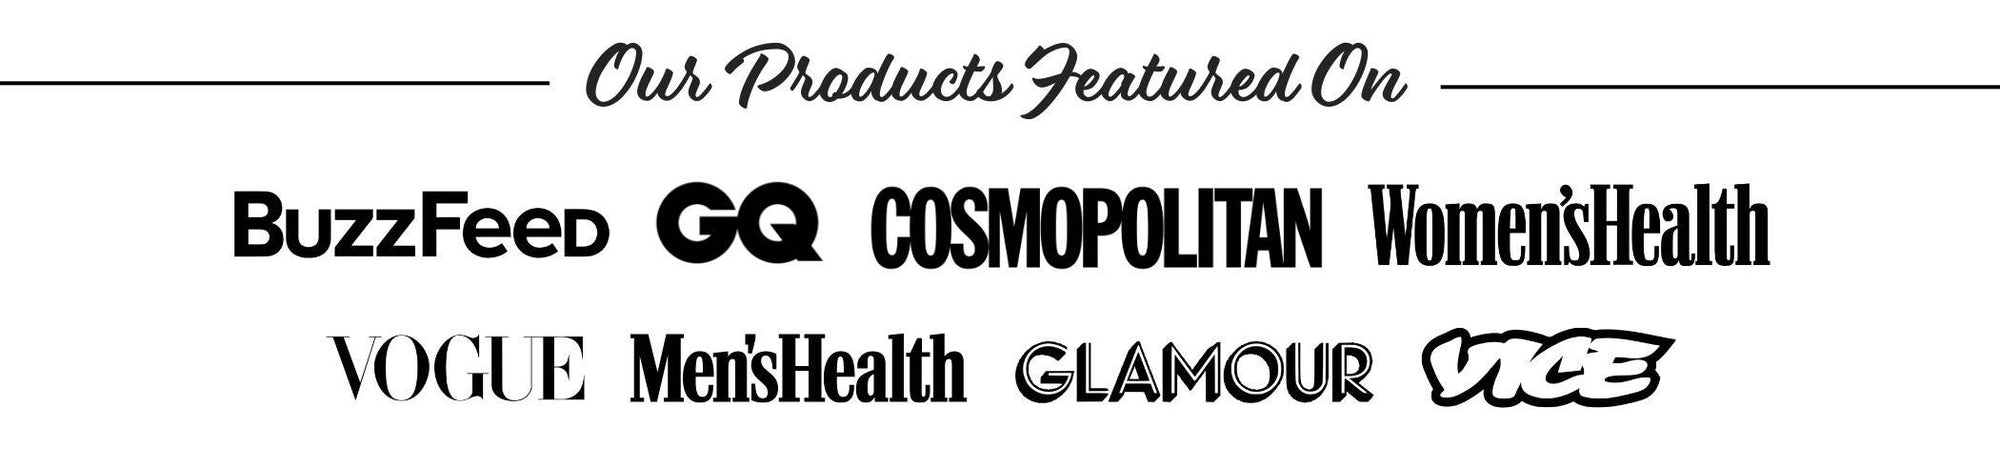 Products Featured On Banner